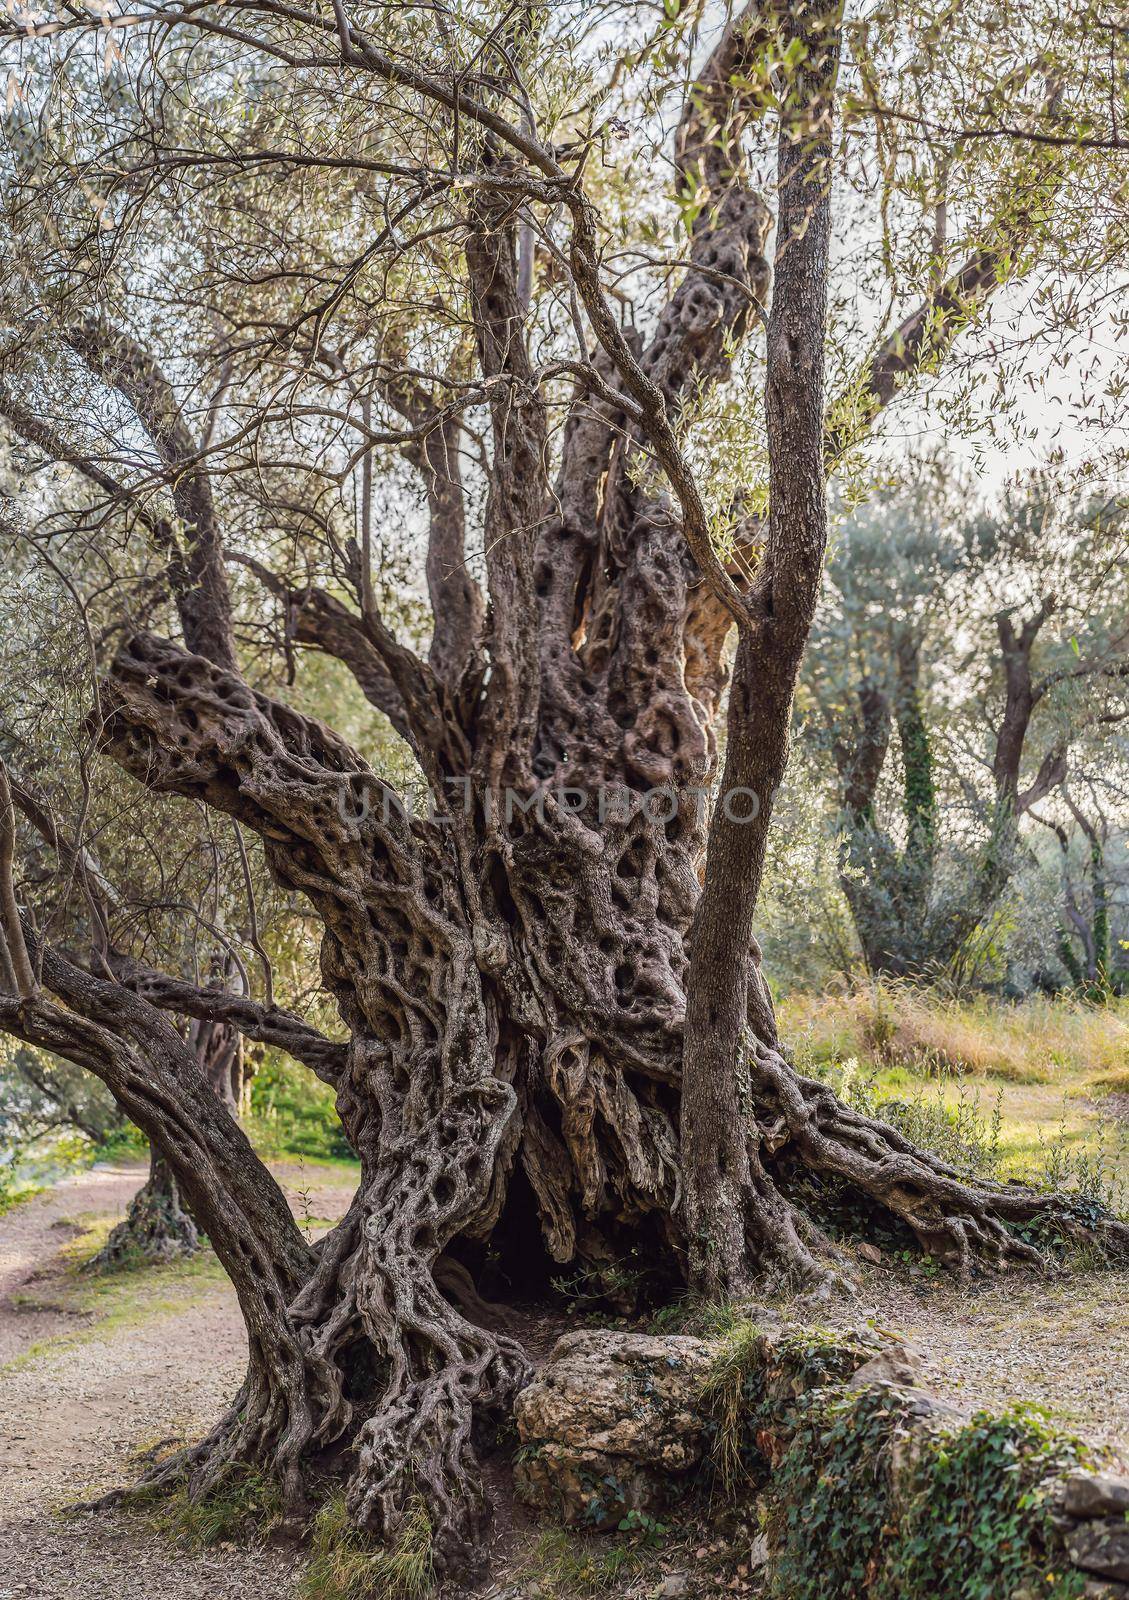 2000 years old olive tree: Stara Maslina in Budva, Montenegro. It is thought to be the oldest tree in Europe and is a tourist attraction. In the background the montenegrin mountains. Europe by galitskaya